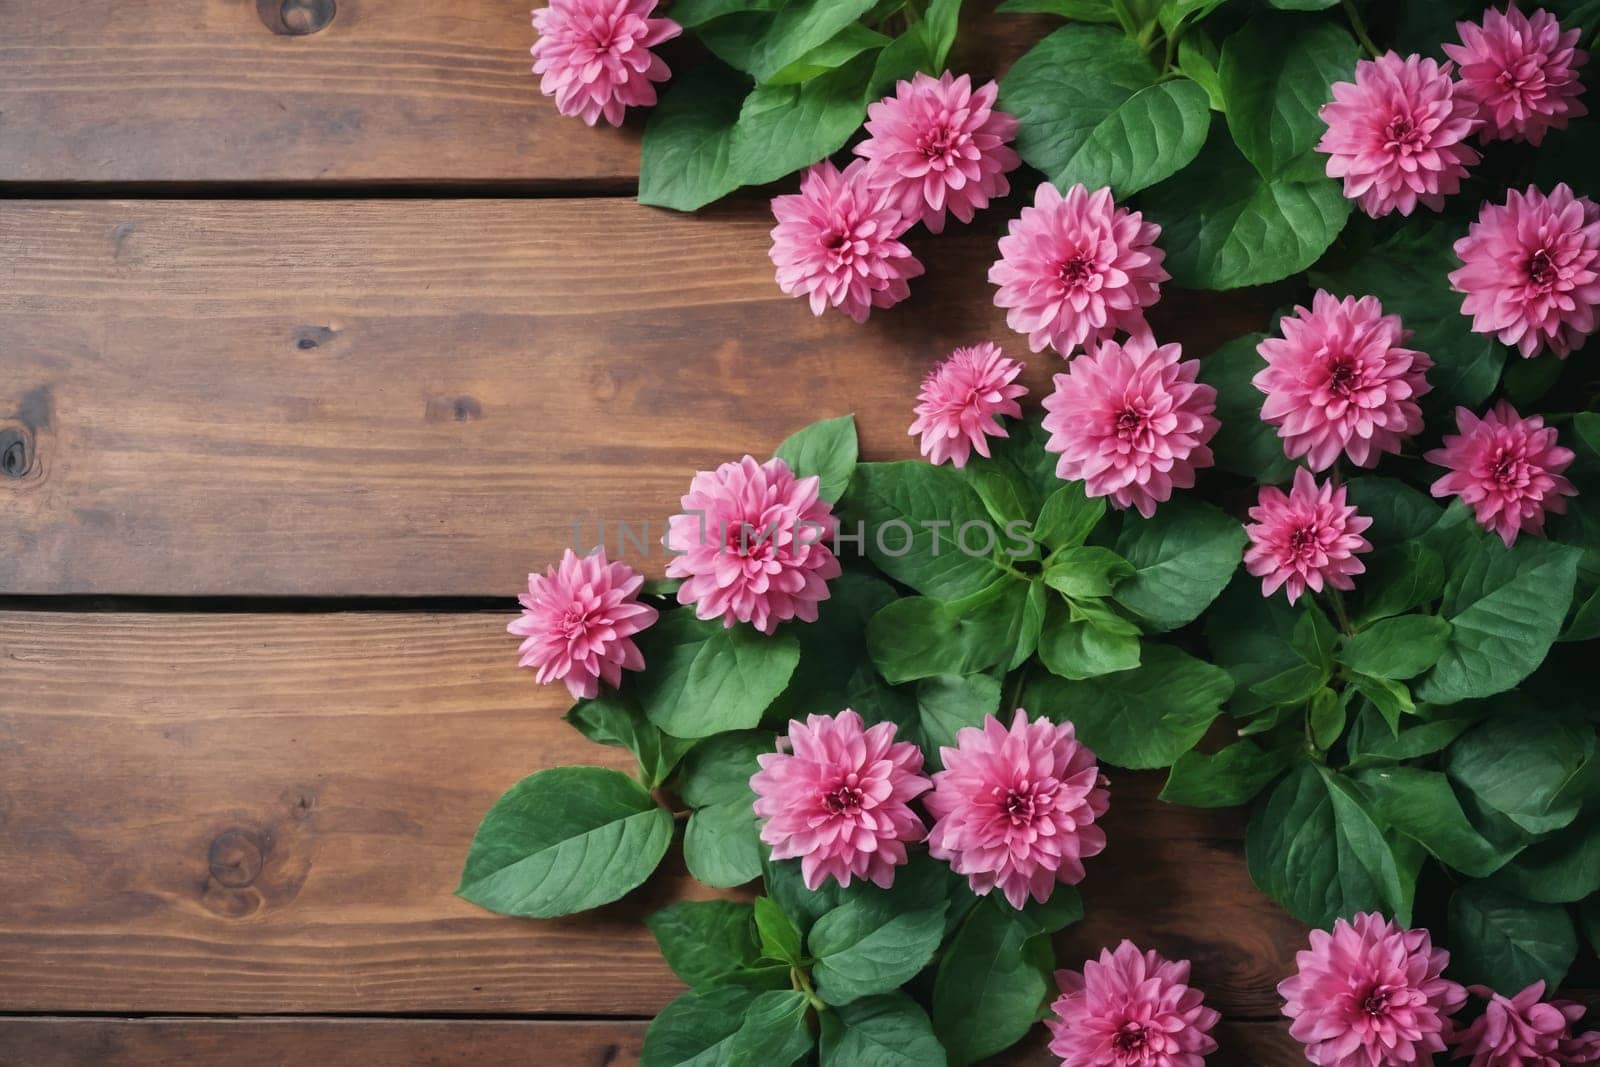 A fresh bouquet of pink flowers with lush greenery rests atop a textured wooden table, exuding rustic elegance.